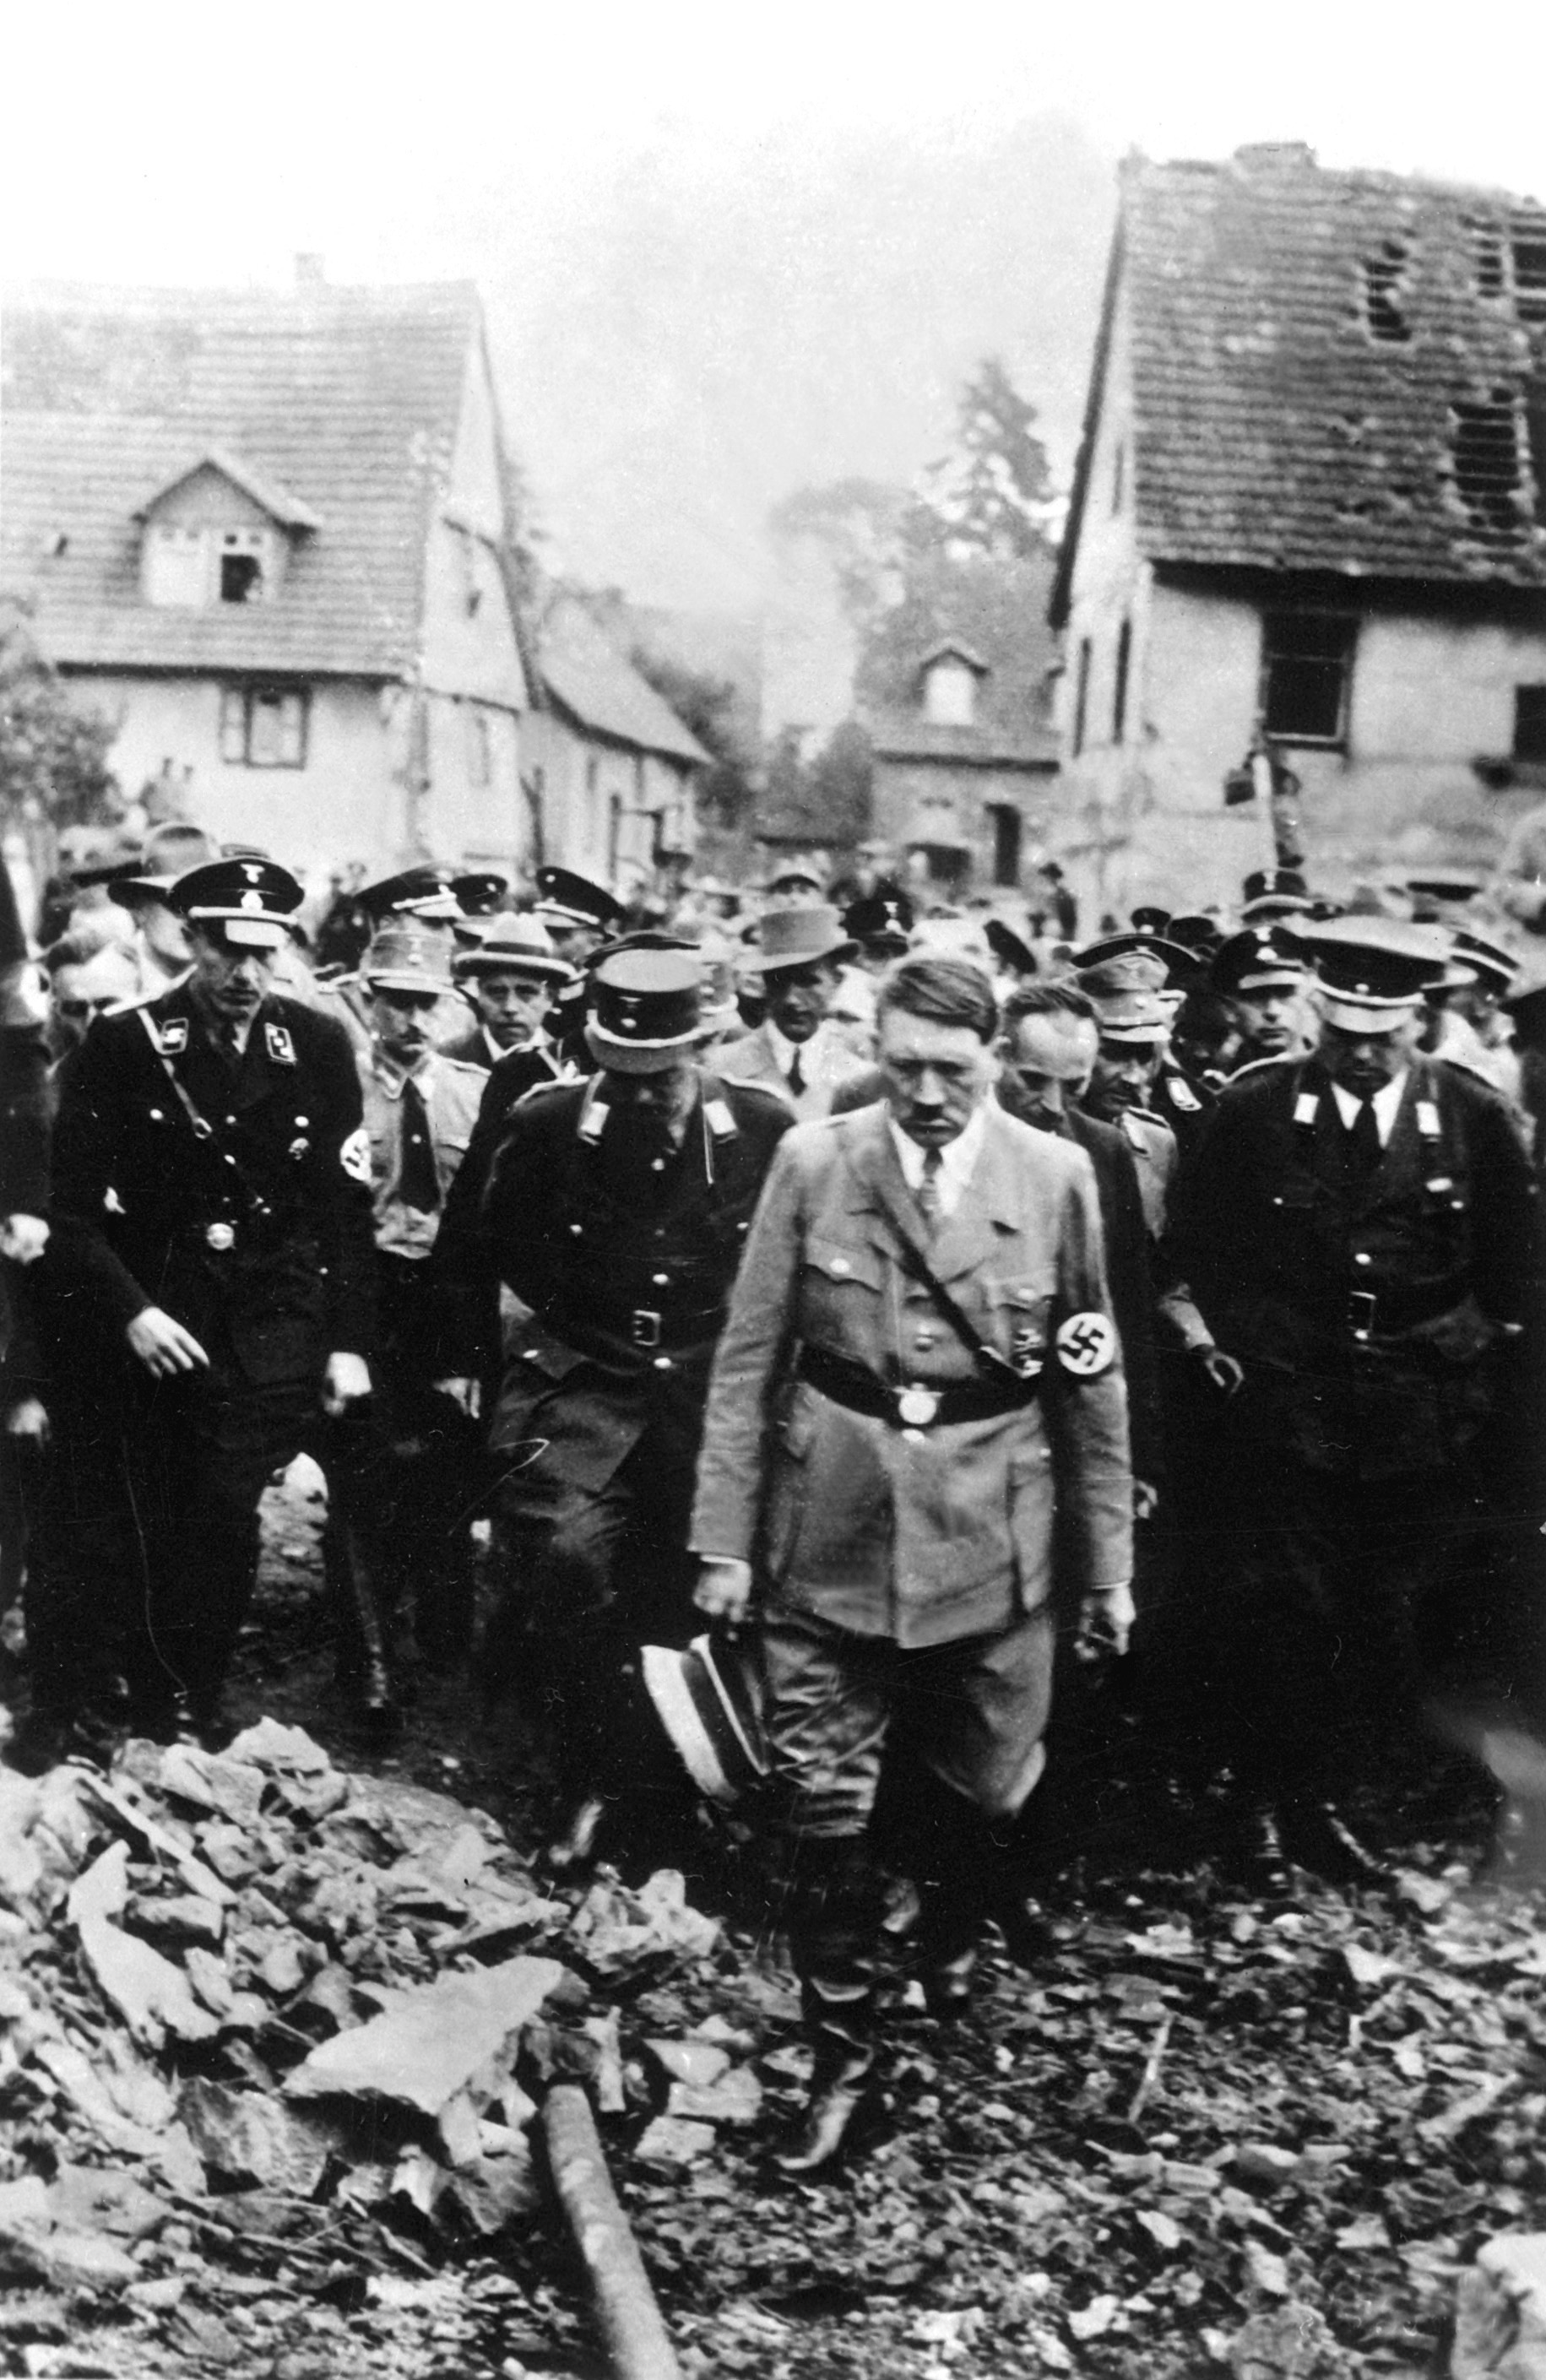 Adolf Hitler visits Oeschelbronn, Württemberg after a munitions plant explosion which destroyed 203 homes